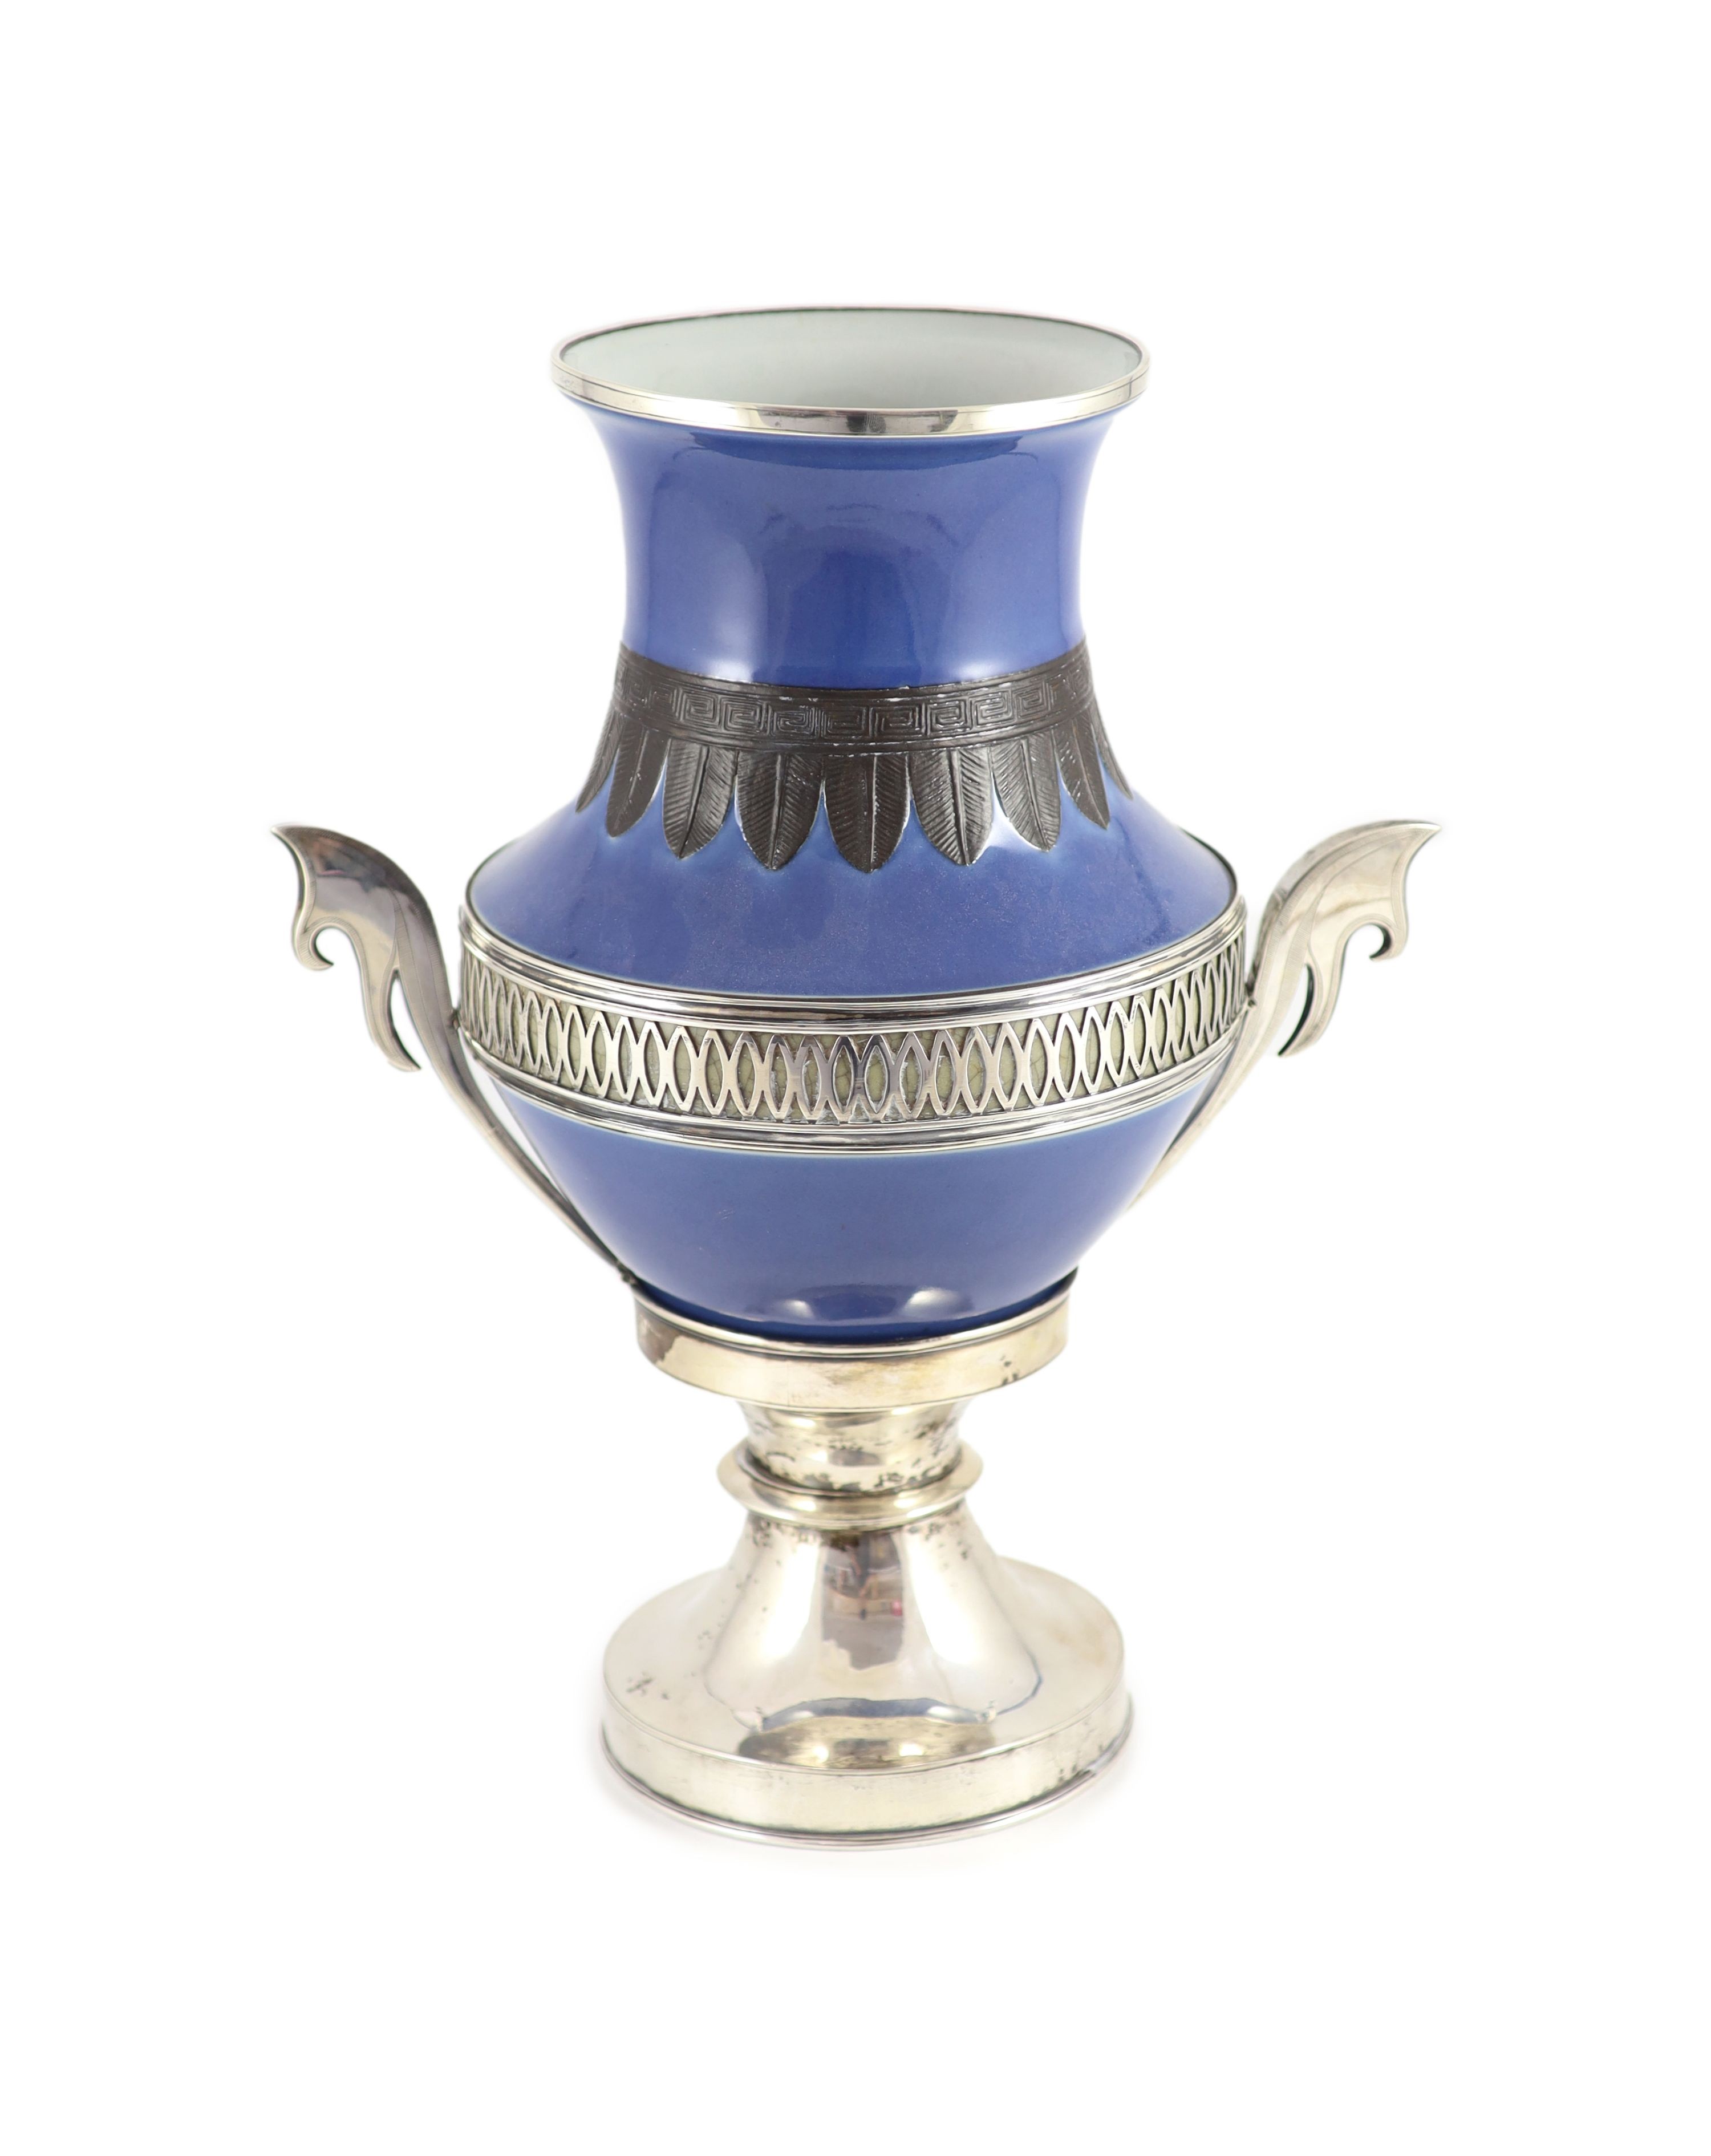 An unusual Chinese silver mounted blue glazed porcelain vase, early 20th century, 43 cm high